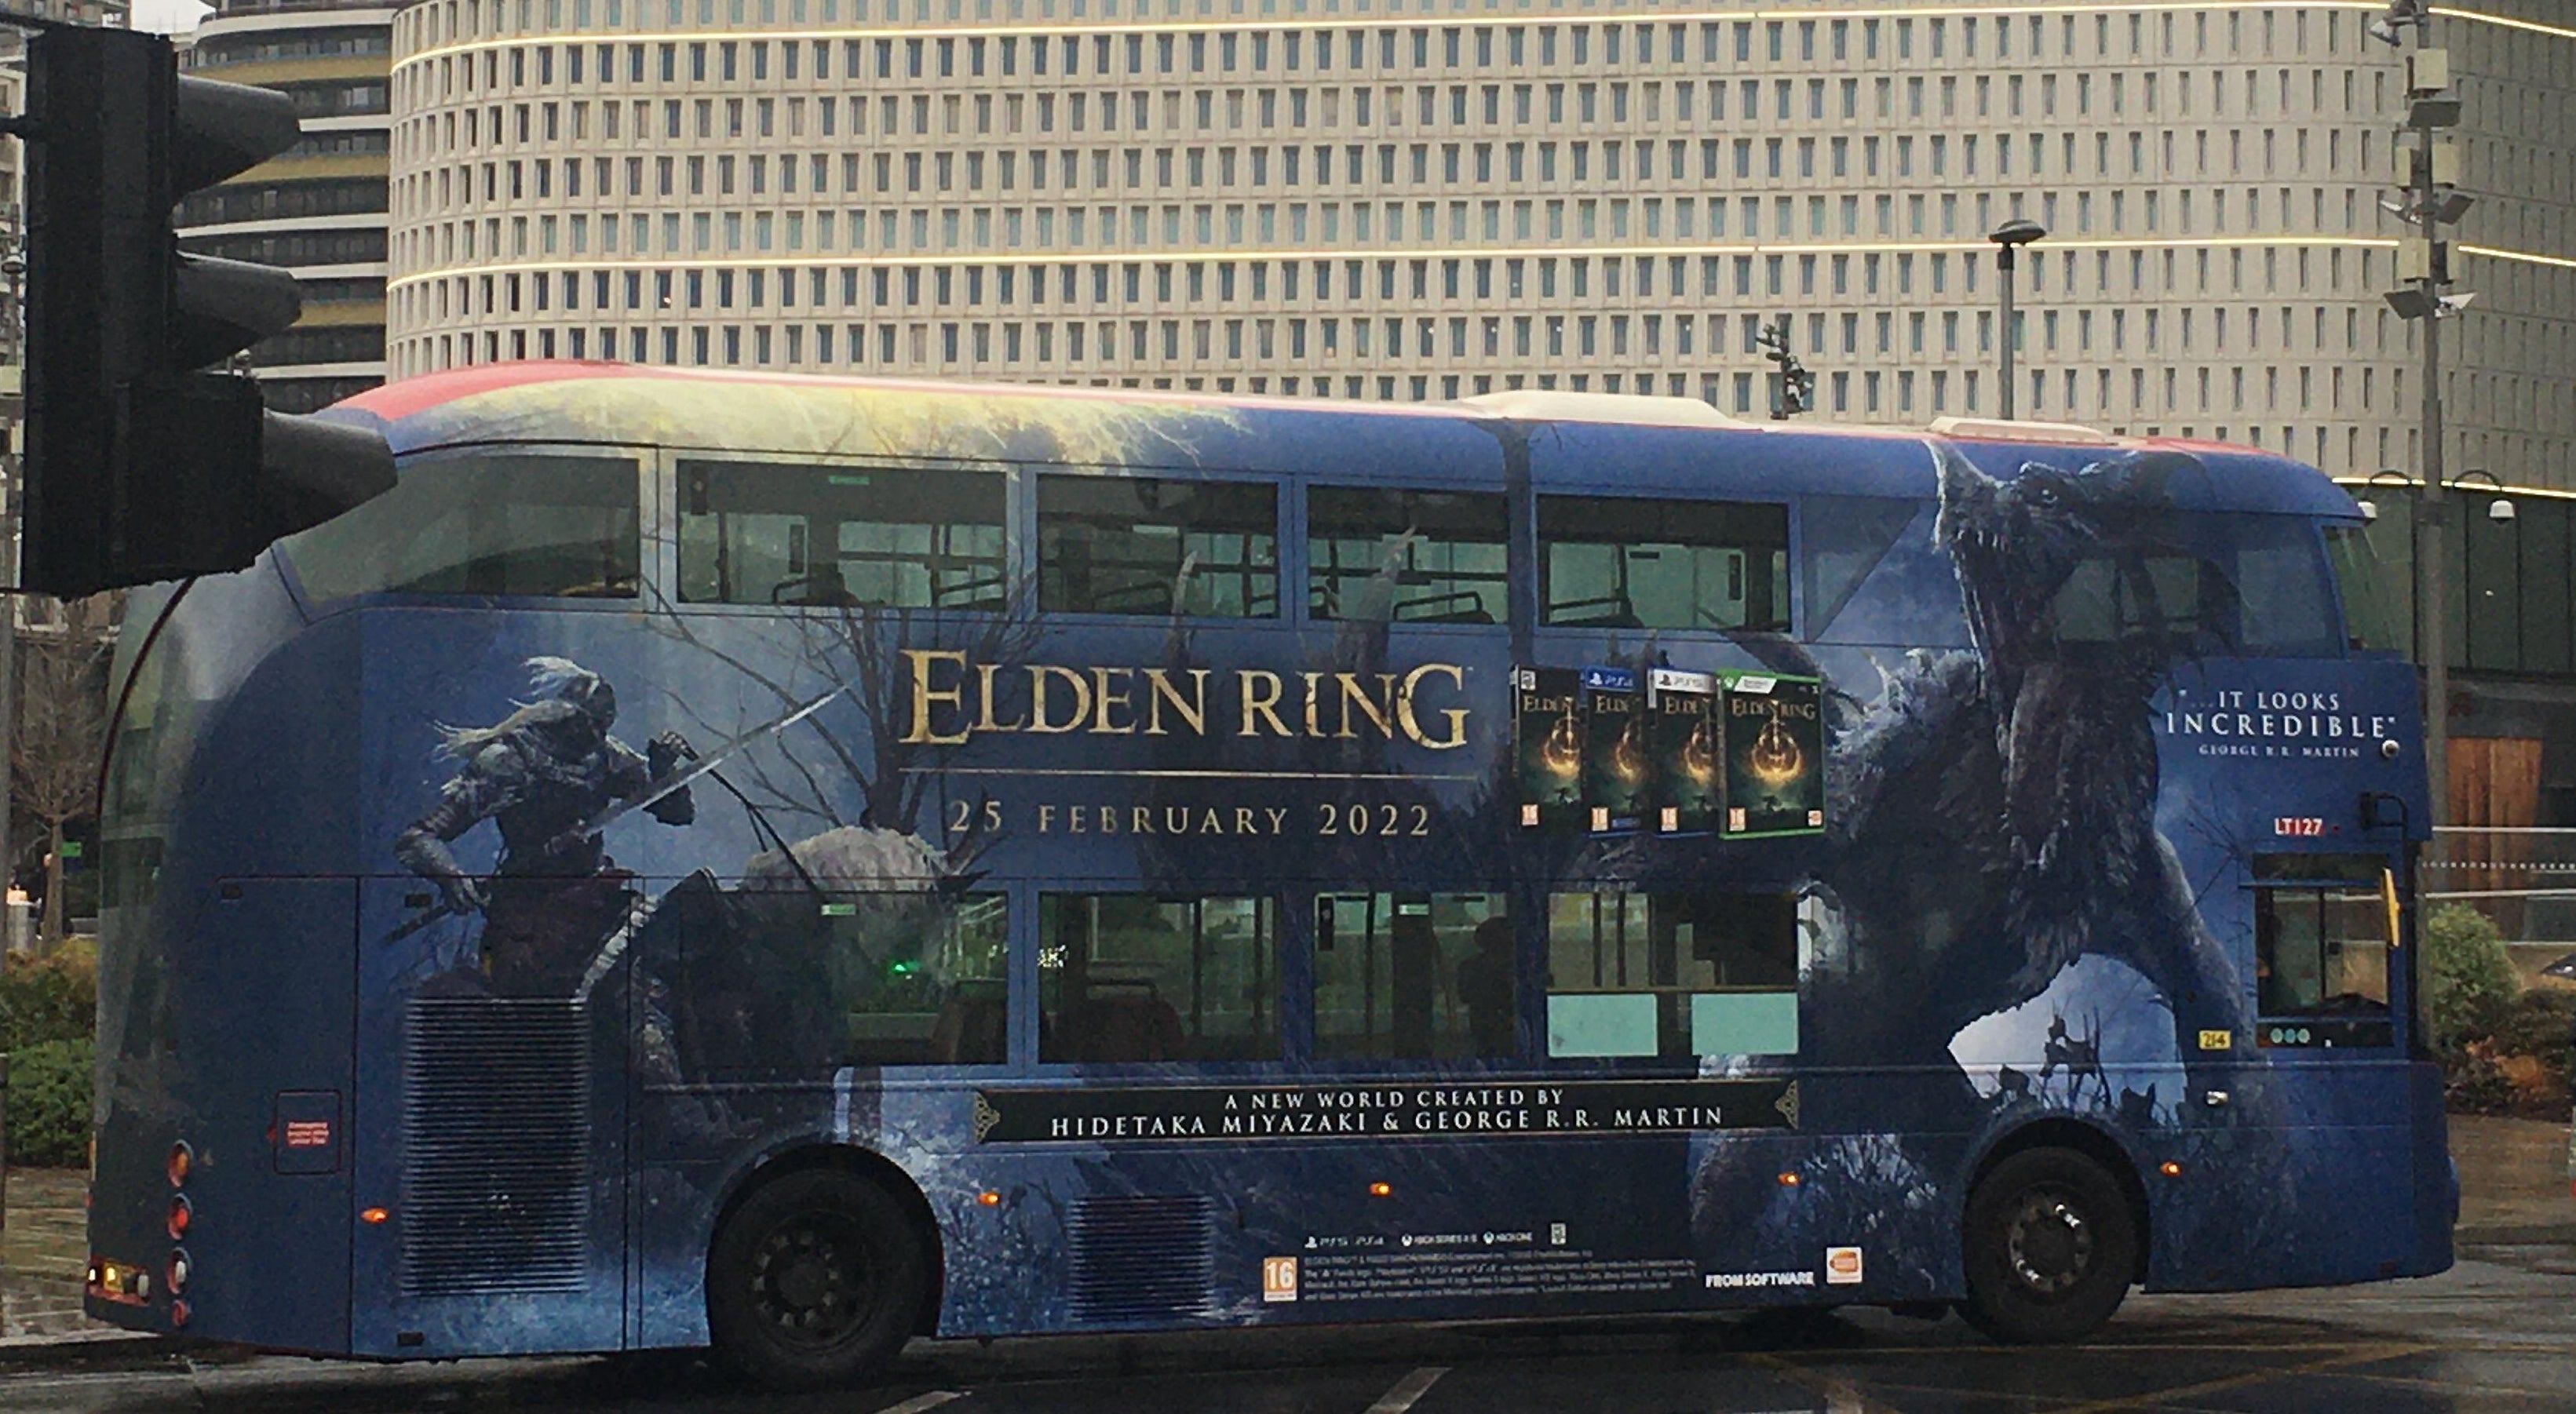 Image for All aboard the Elden Ring hype… bus